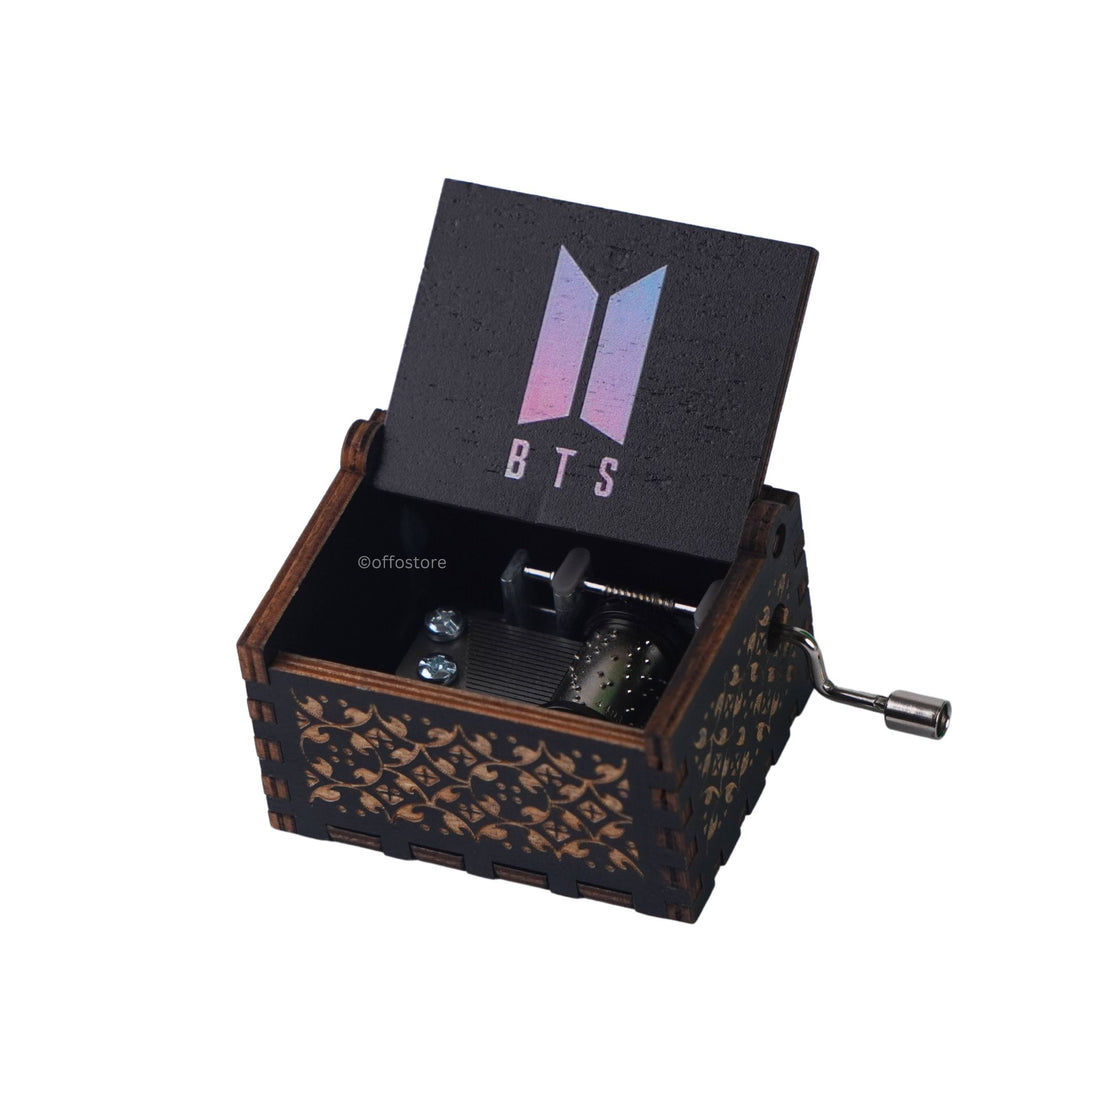 BTS Wooden Hand Cranked Engraved Music Box - Spring Day